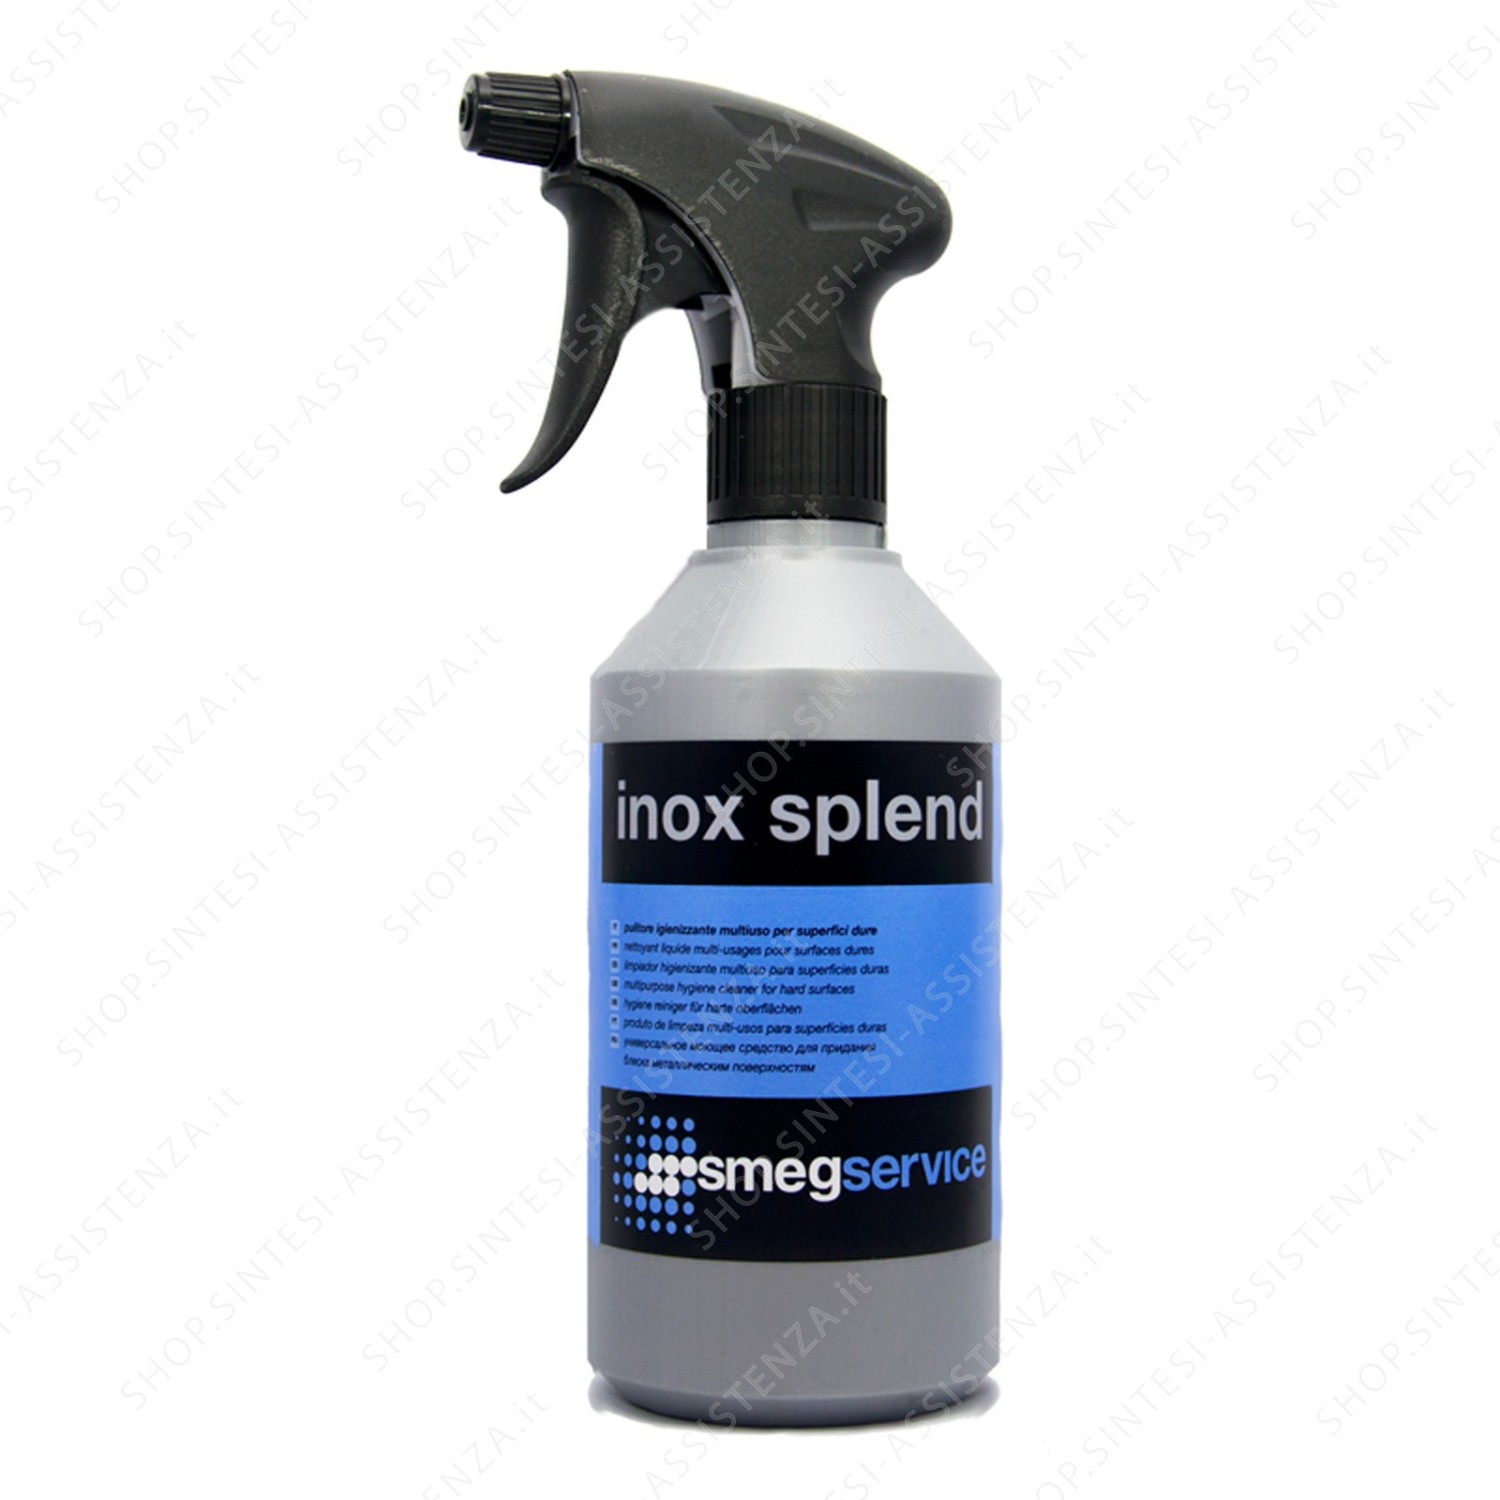 SANITIZER FOR STAINLESS STEEL SURFACES IN CONTACT WITH FOOD INOX SPLEND - INOX-SPLEND